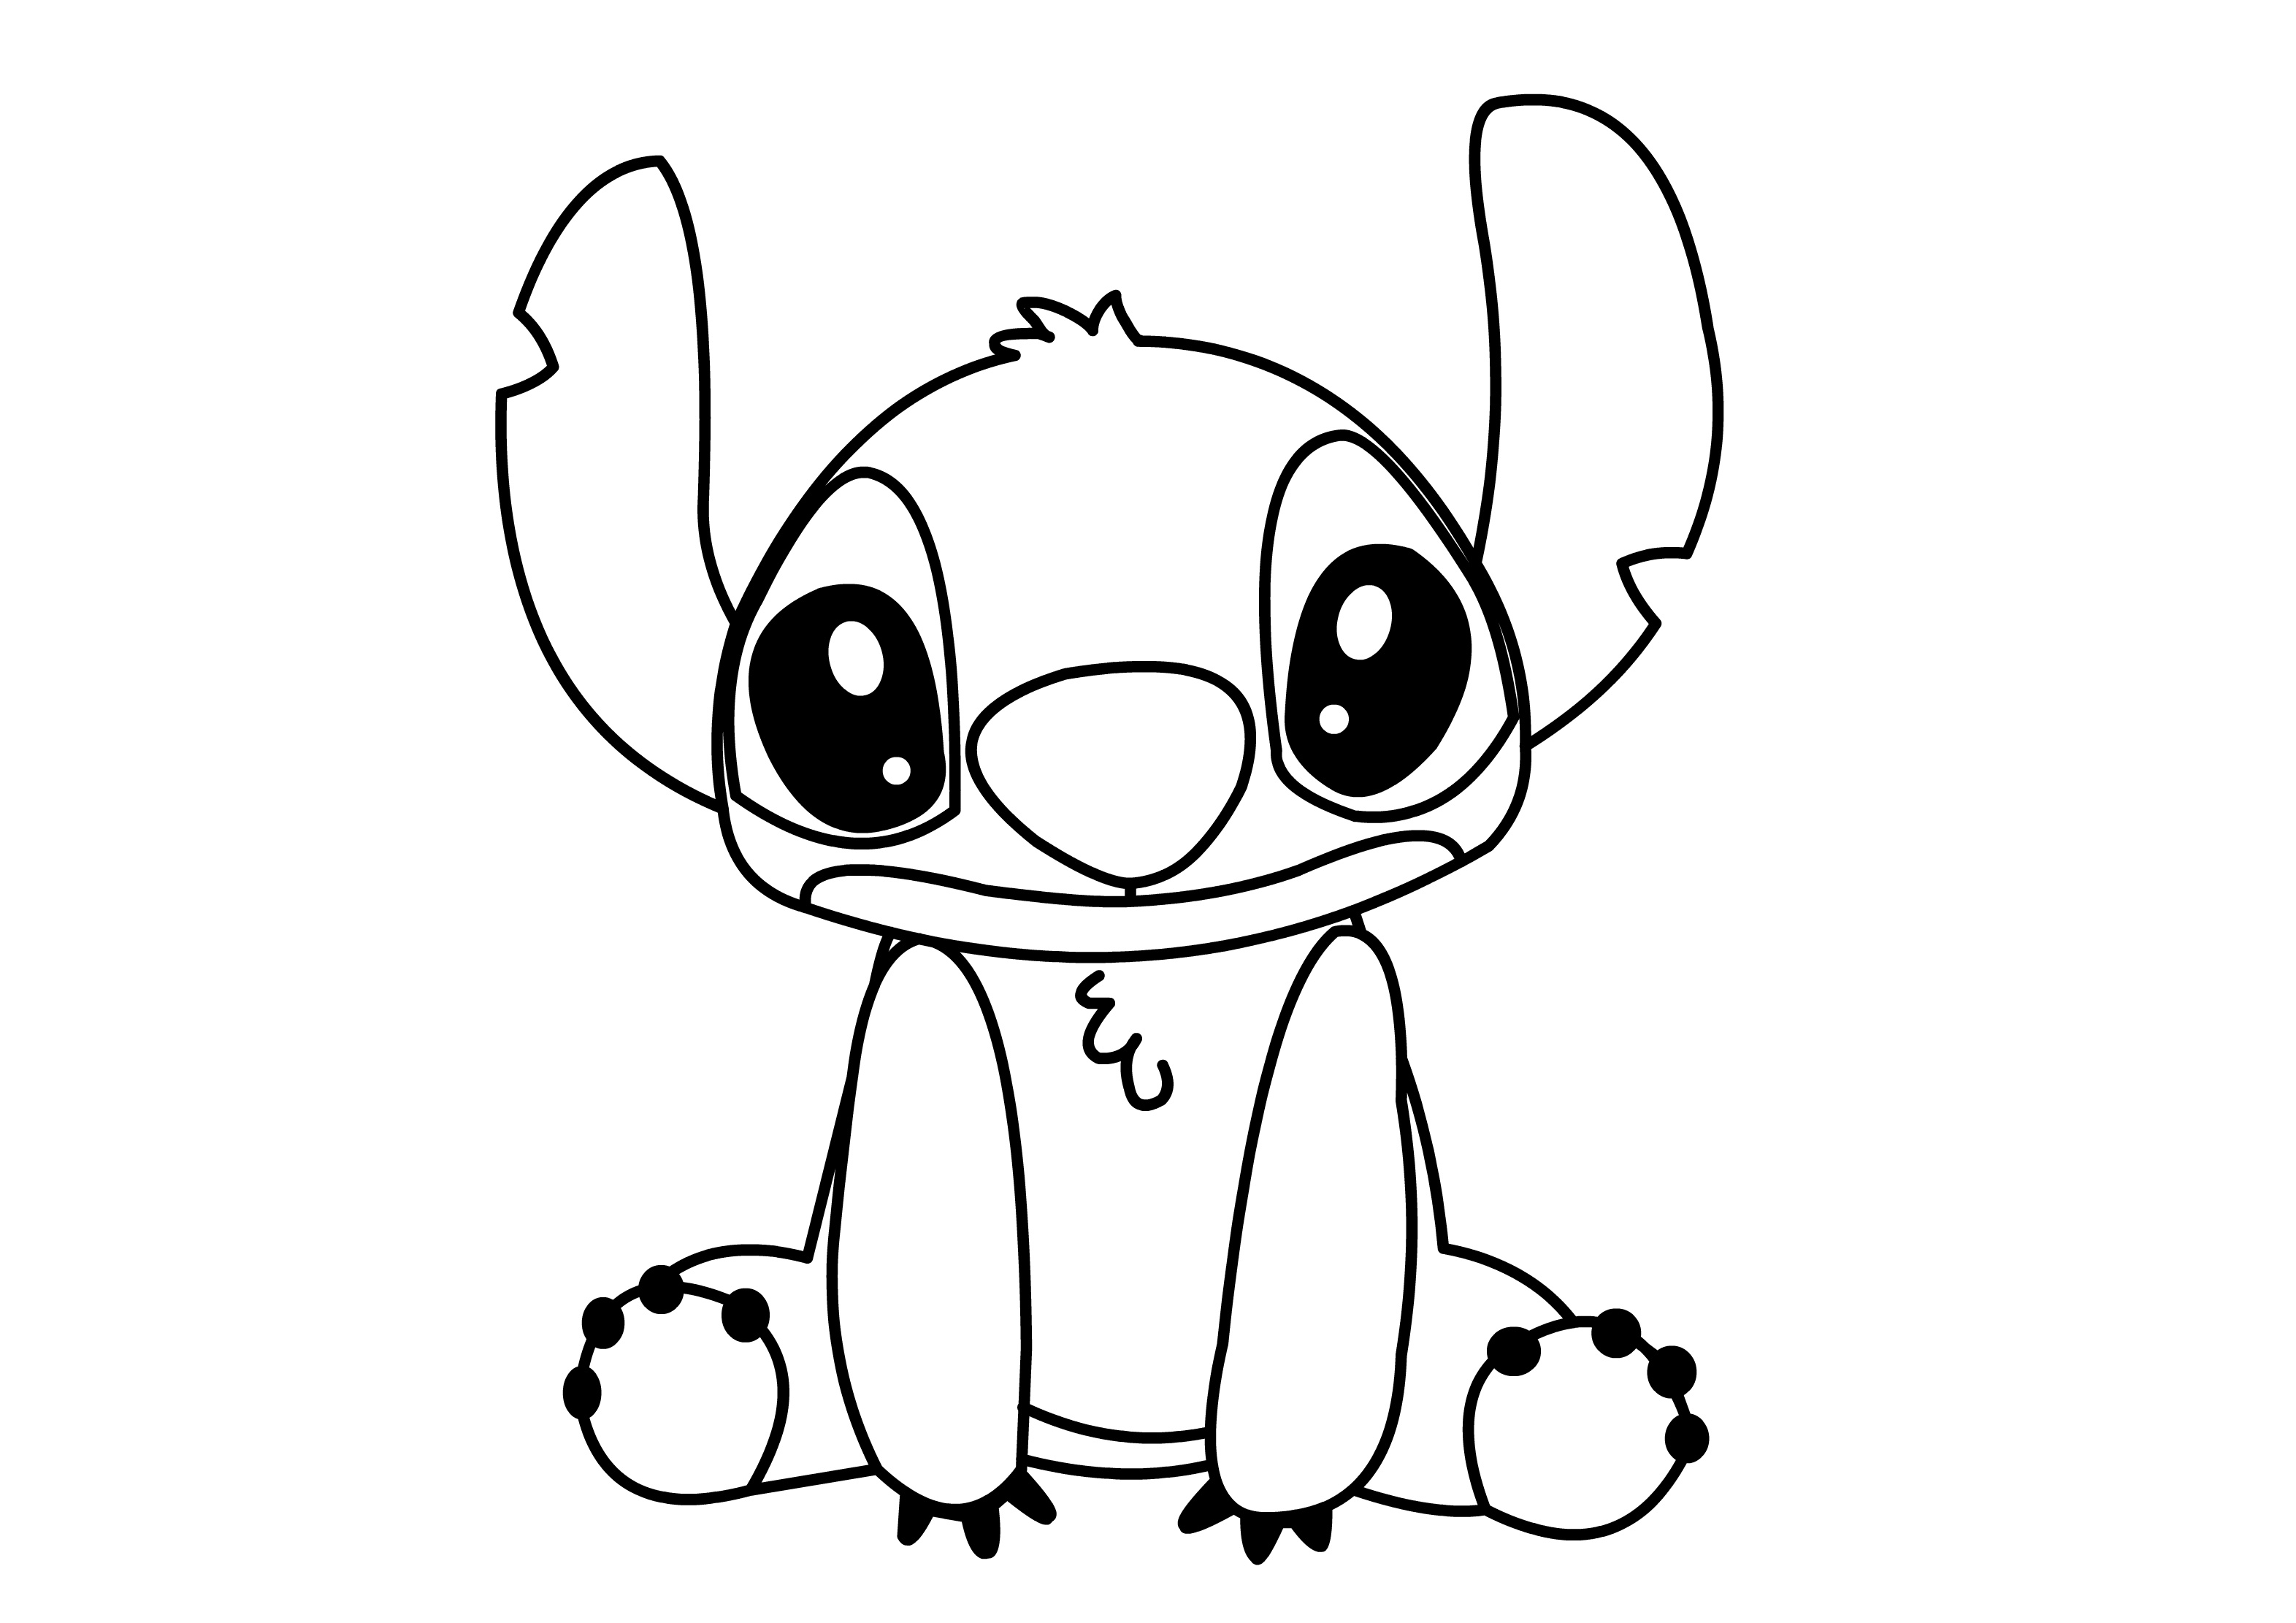 Disney Cute Lilo Stitch Coloring Pages High Resolution Printable Page